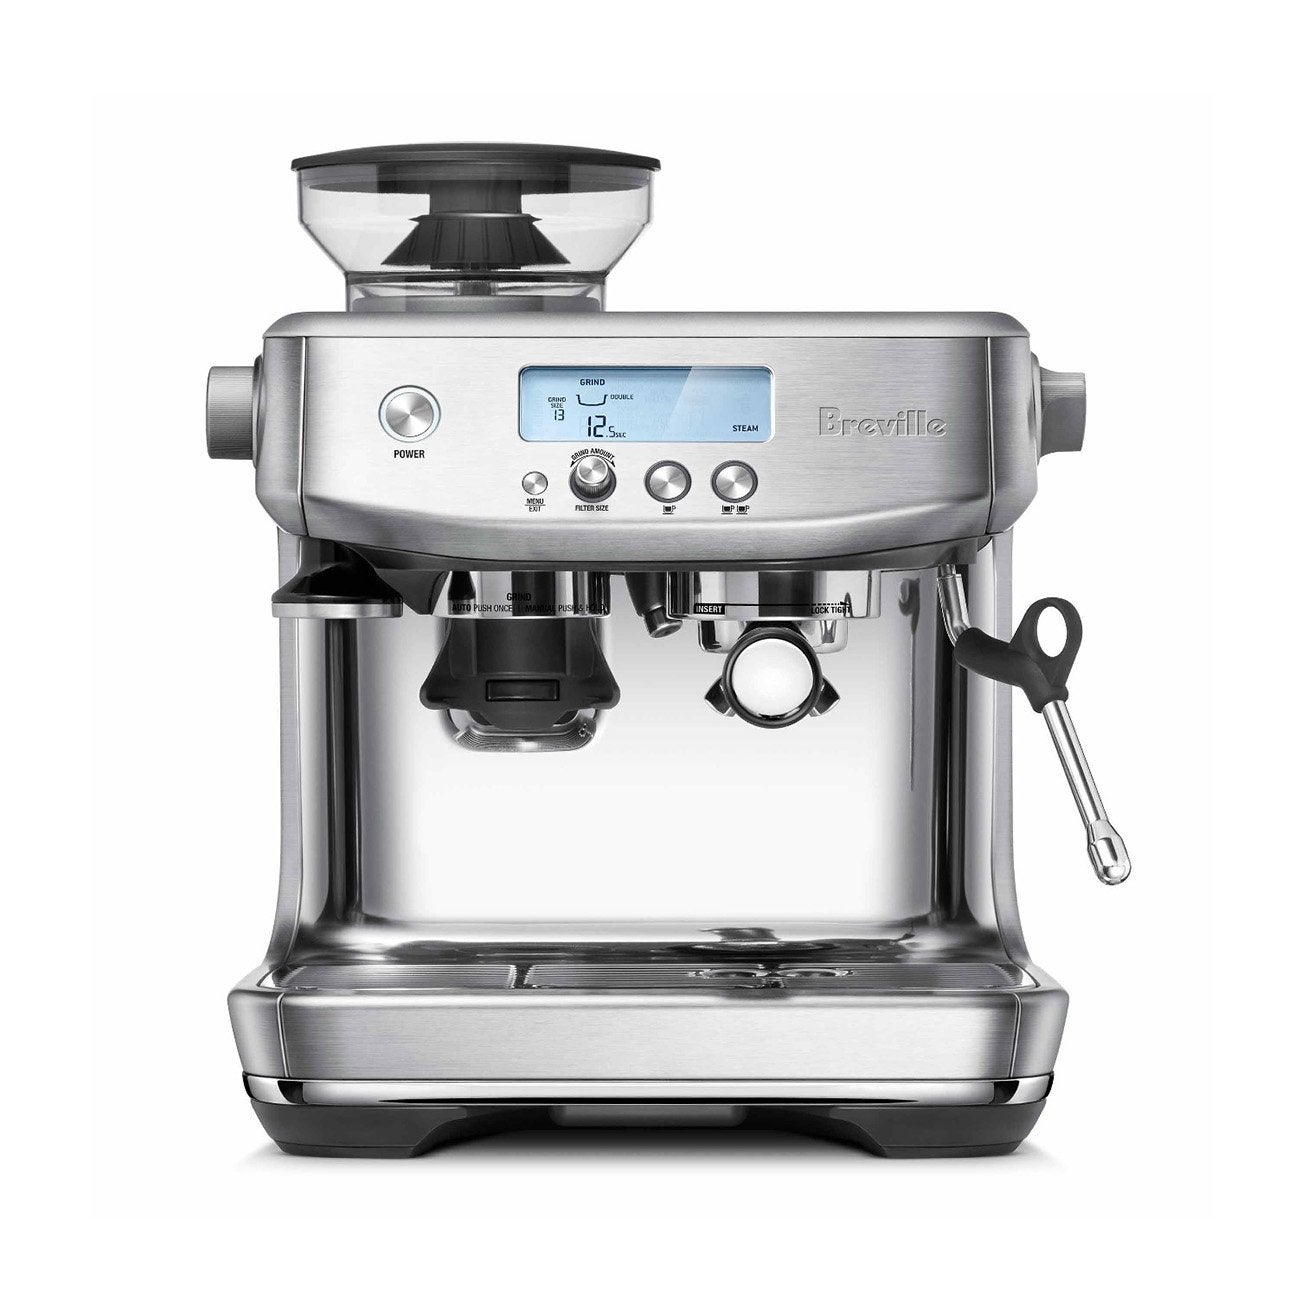 Breville Bambino Plus review: compact yet feature-packed